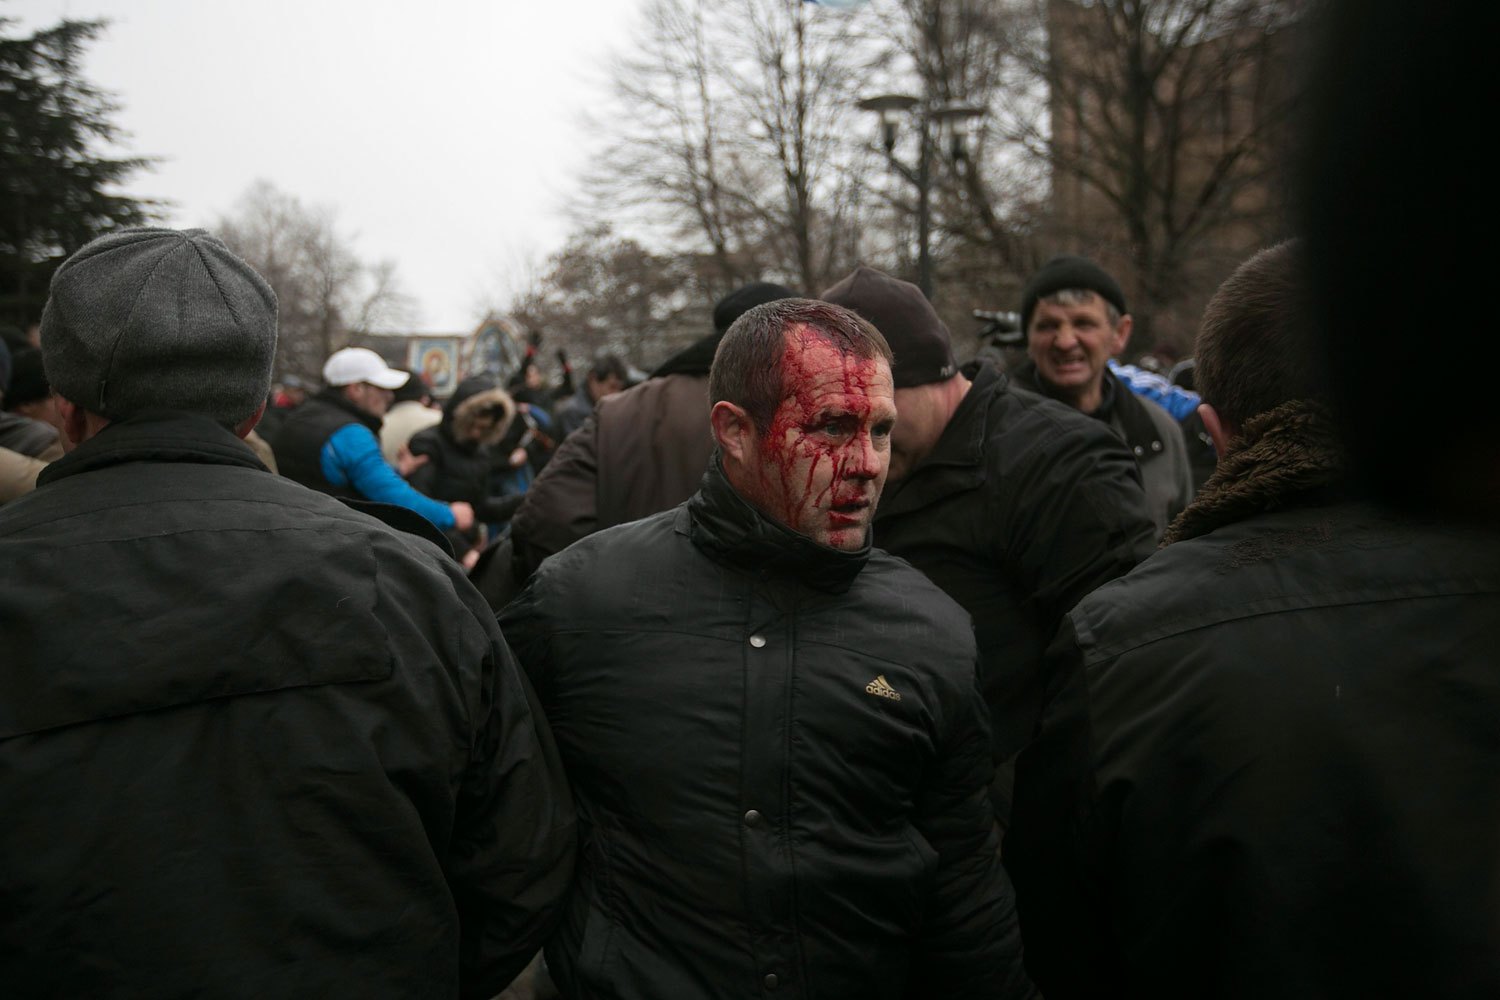 A Ukrainian man walks away after being injured in a stampede during clashes at rallies held by ethnic Russians and Crimean Tatars near the Crimean parliament building in Simferopol, Feb. 26, 2014.